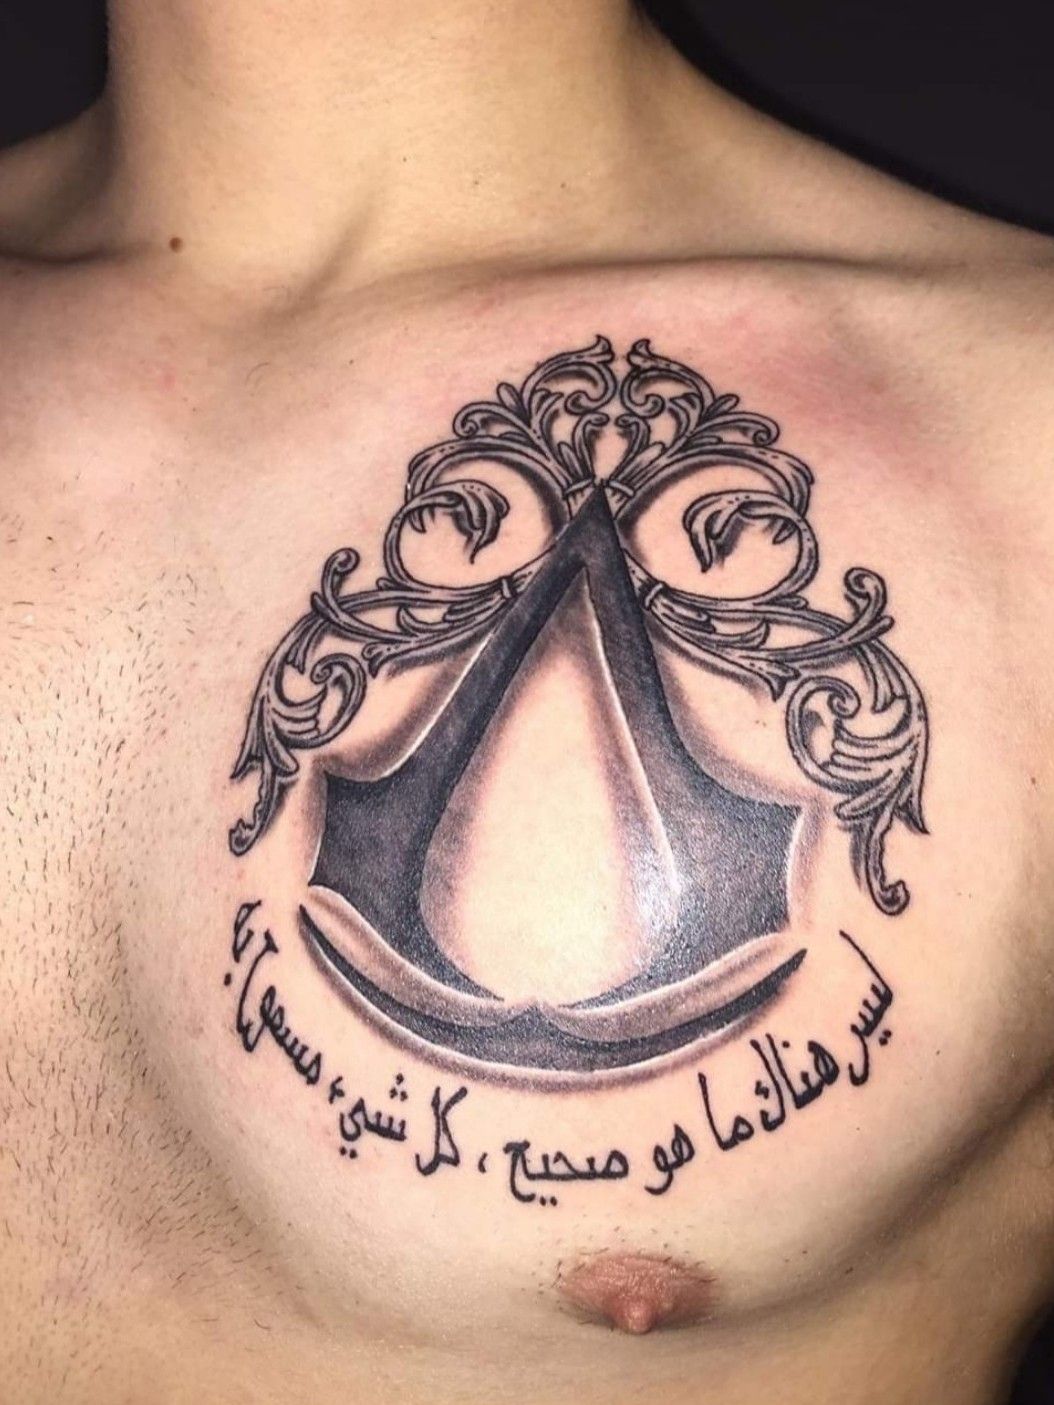 Assassins Creed on X Get this unique back tattoo in Assassins Creed  Valhalla by completing the Ottoman Brotherhood Challenge   Perform 10  kills from a zipline before January 20th 2022 httpstcoDpPpgcAxiC 